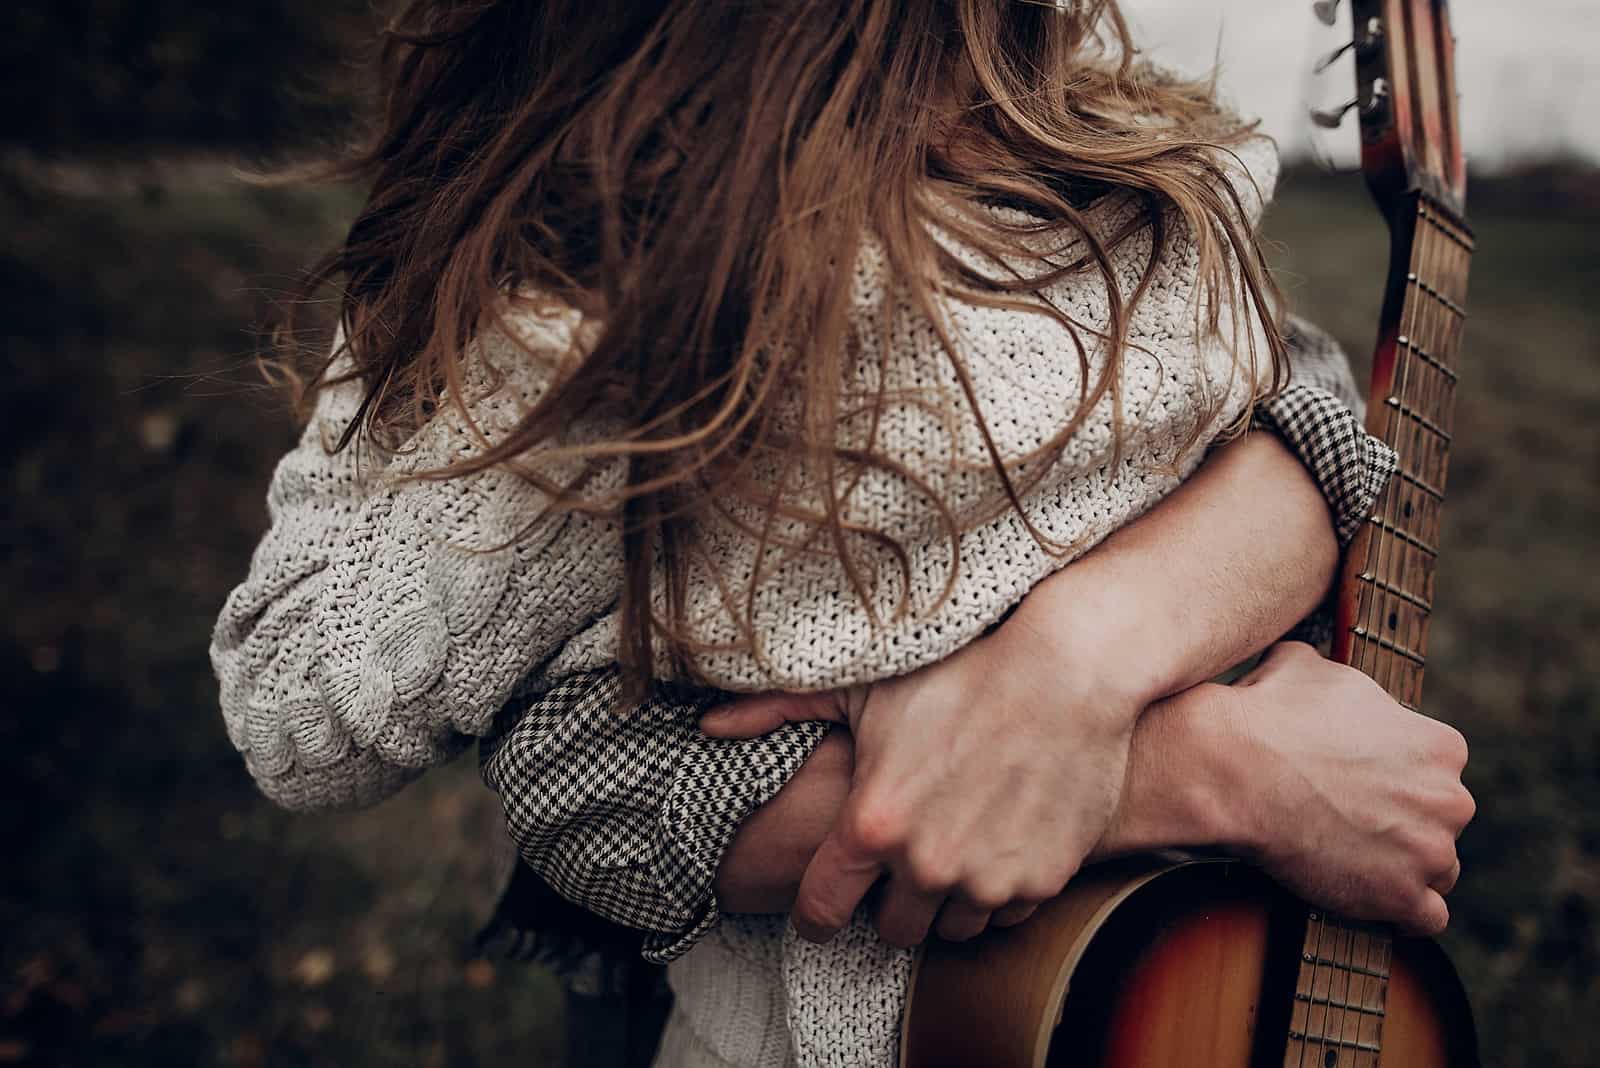 man hugging a woman while holding a guitar